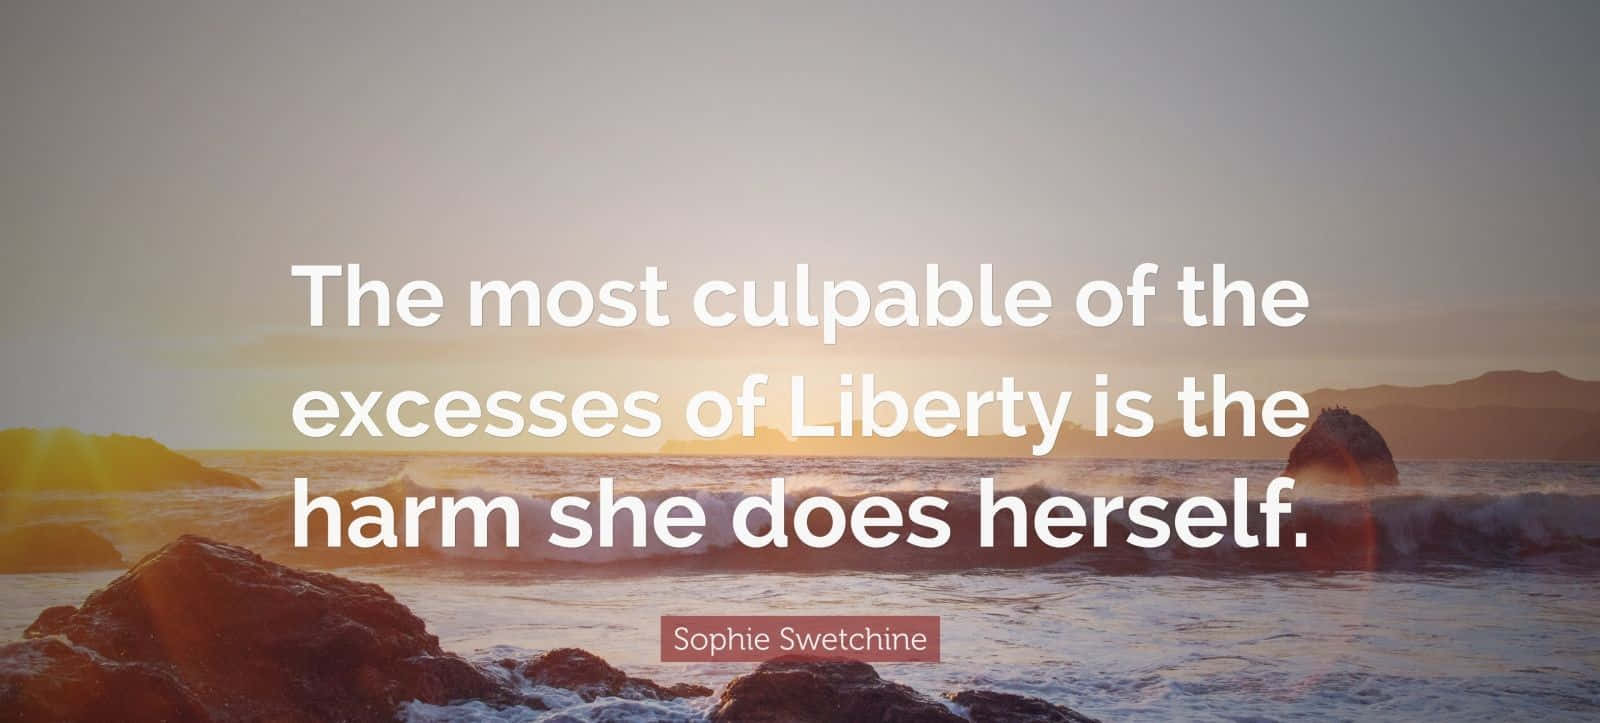 Culpable Excessesof Liberty Quote Wallpaper